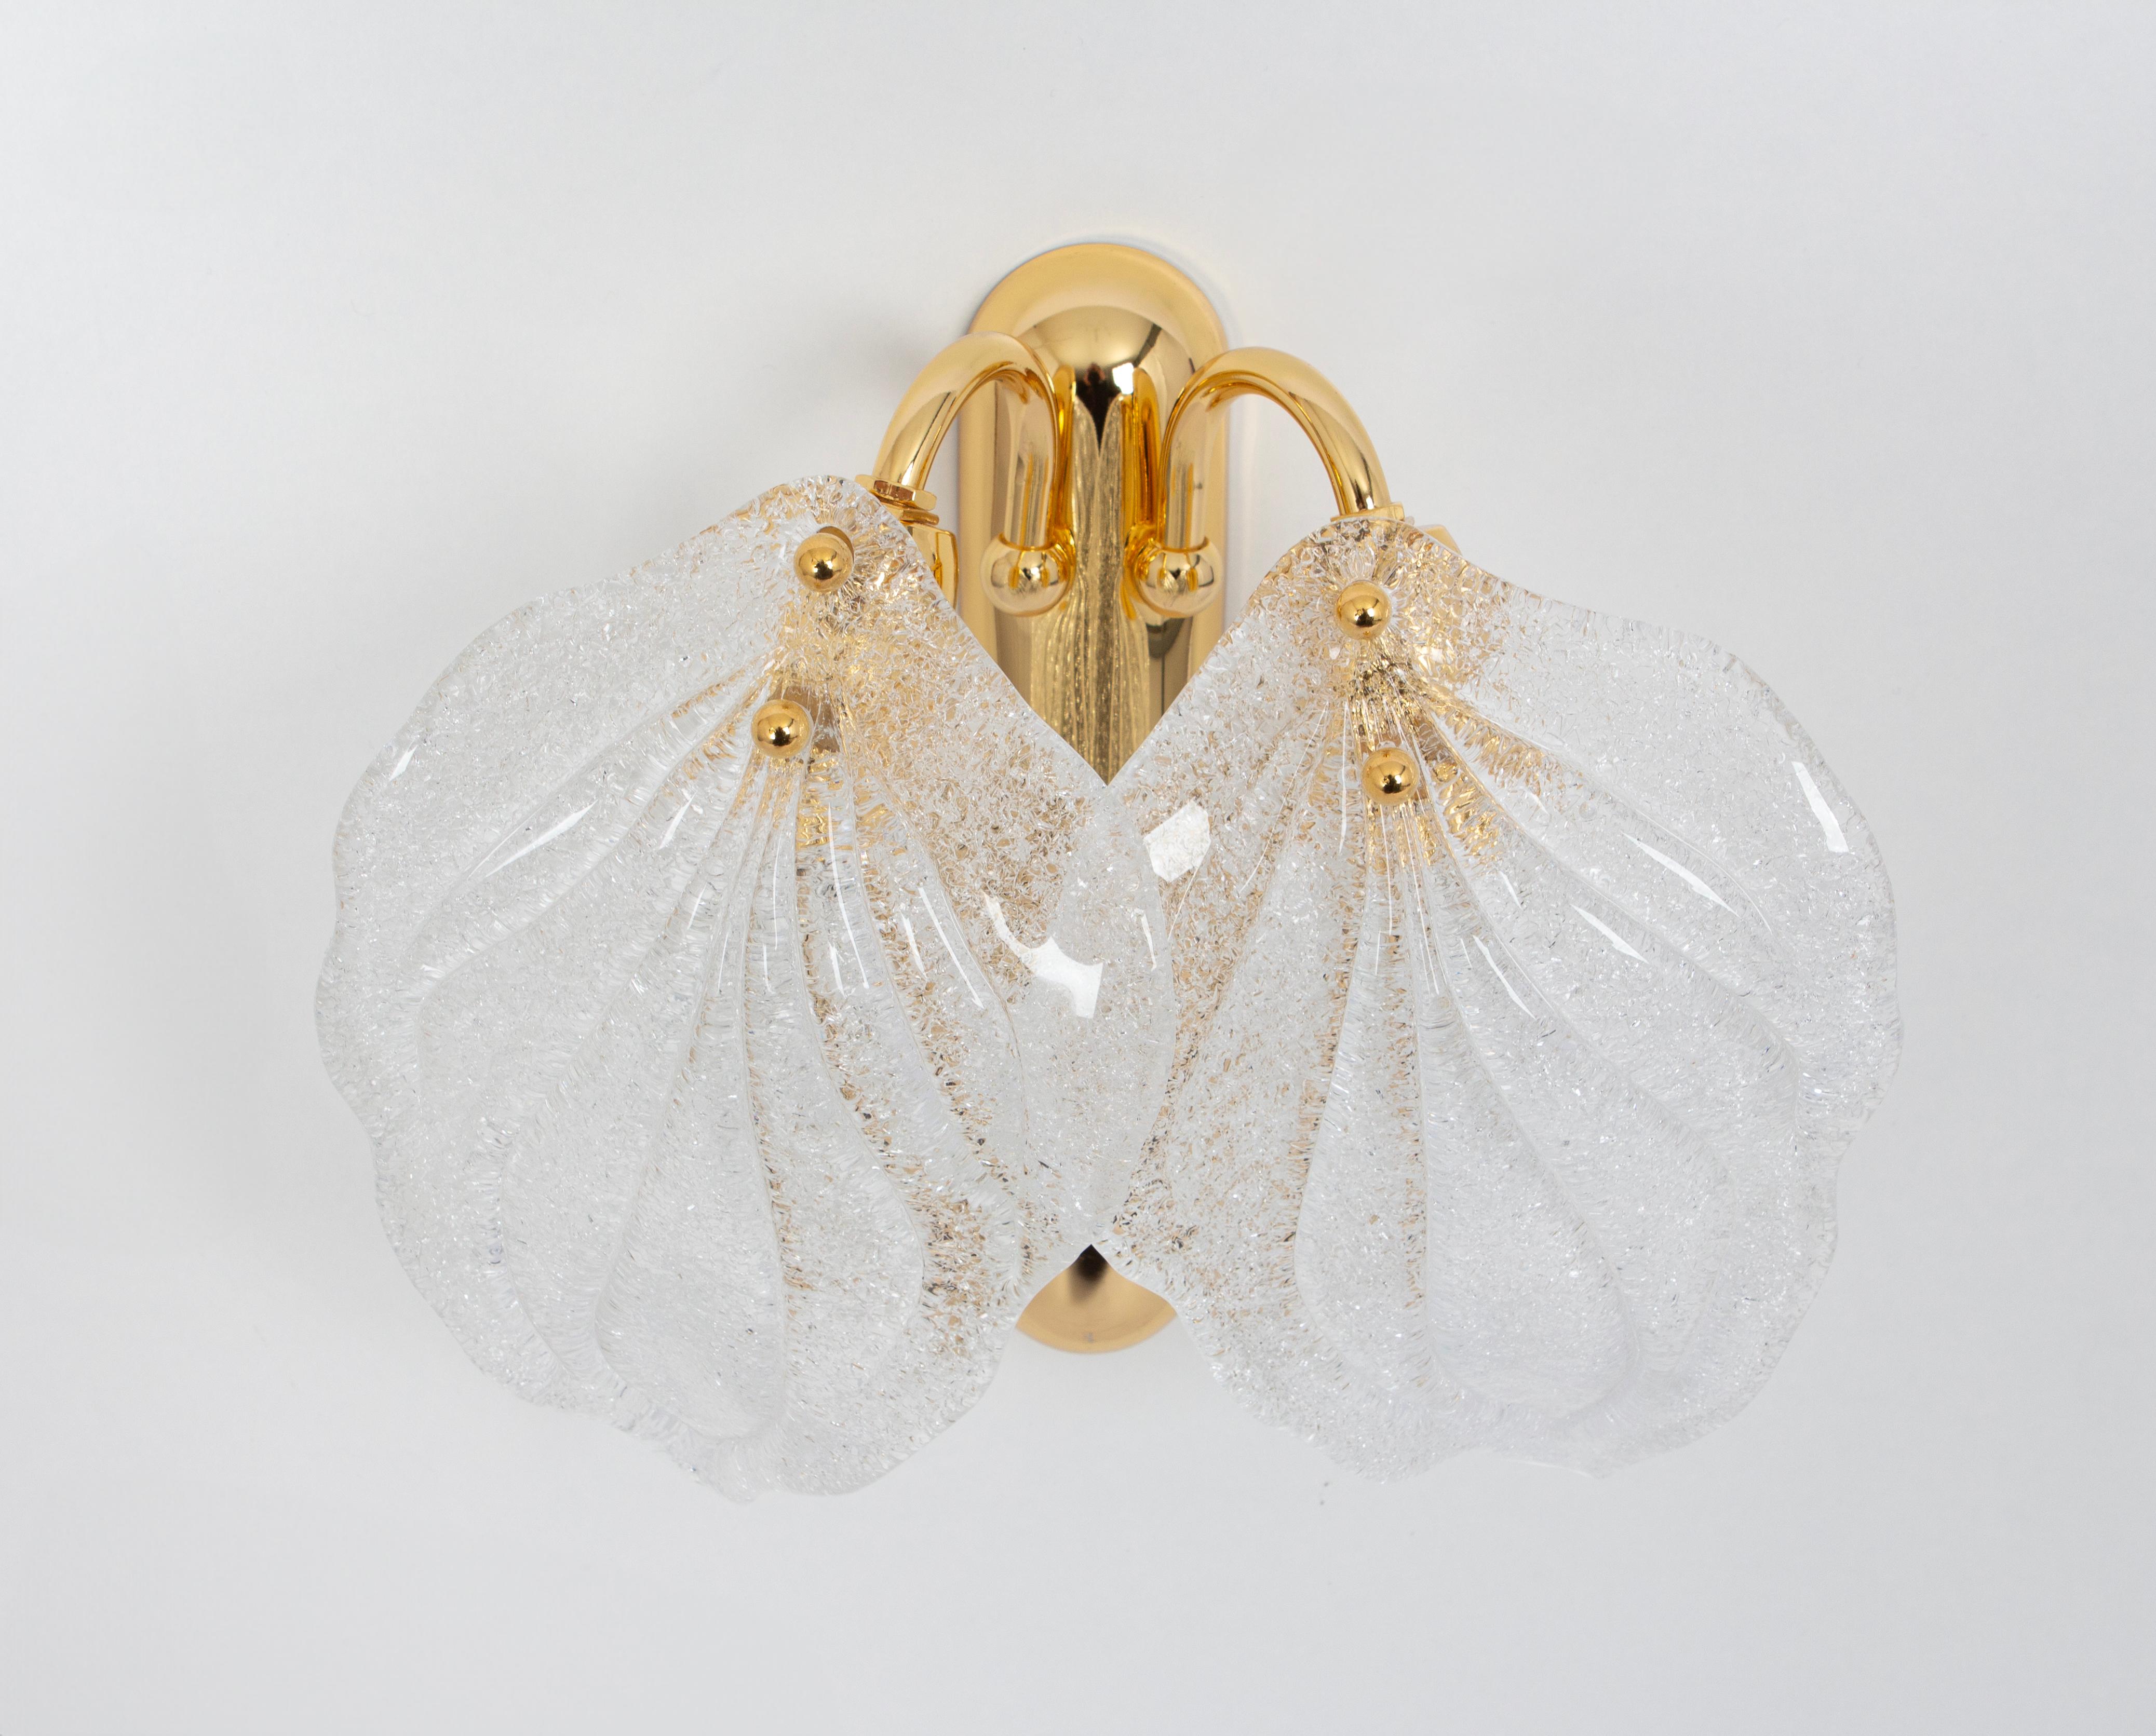 Italian Pair of Large Stunning Murano Glass Wall Sconce by Novaresi, Italy, 1970s For Sale